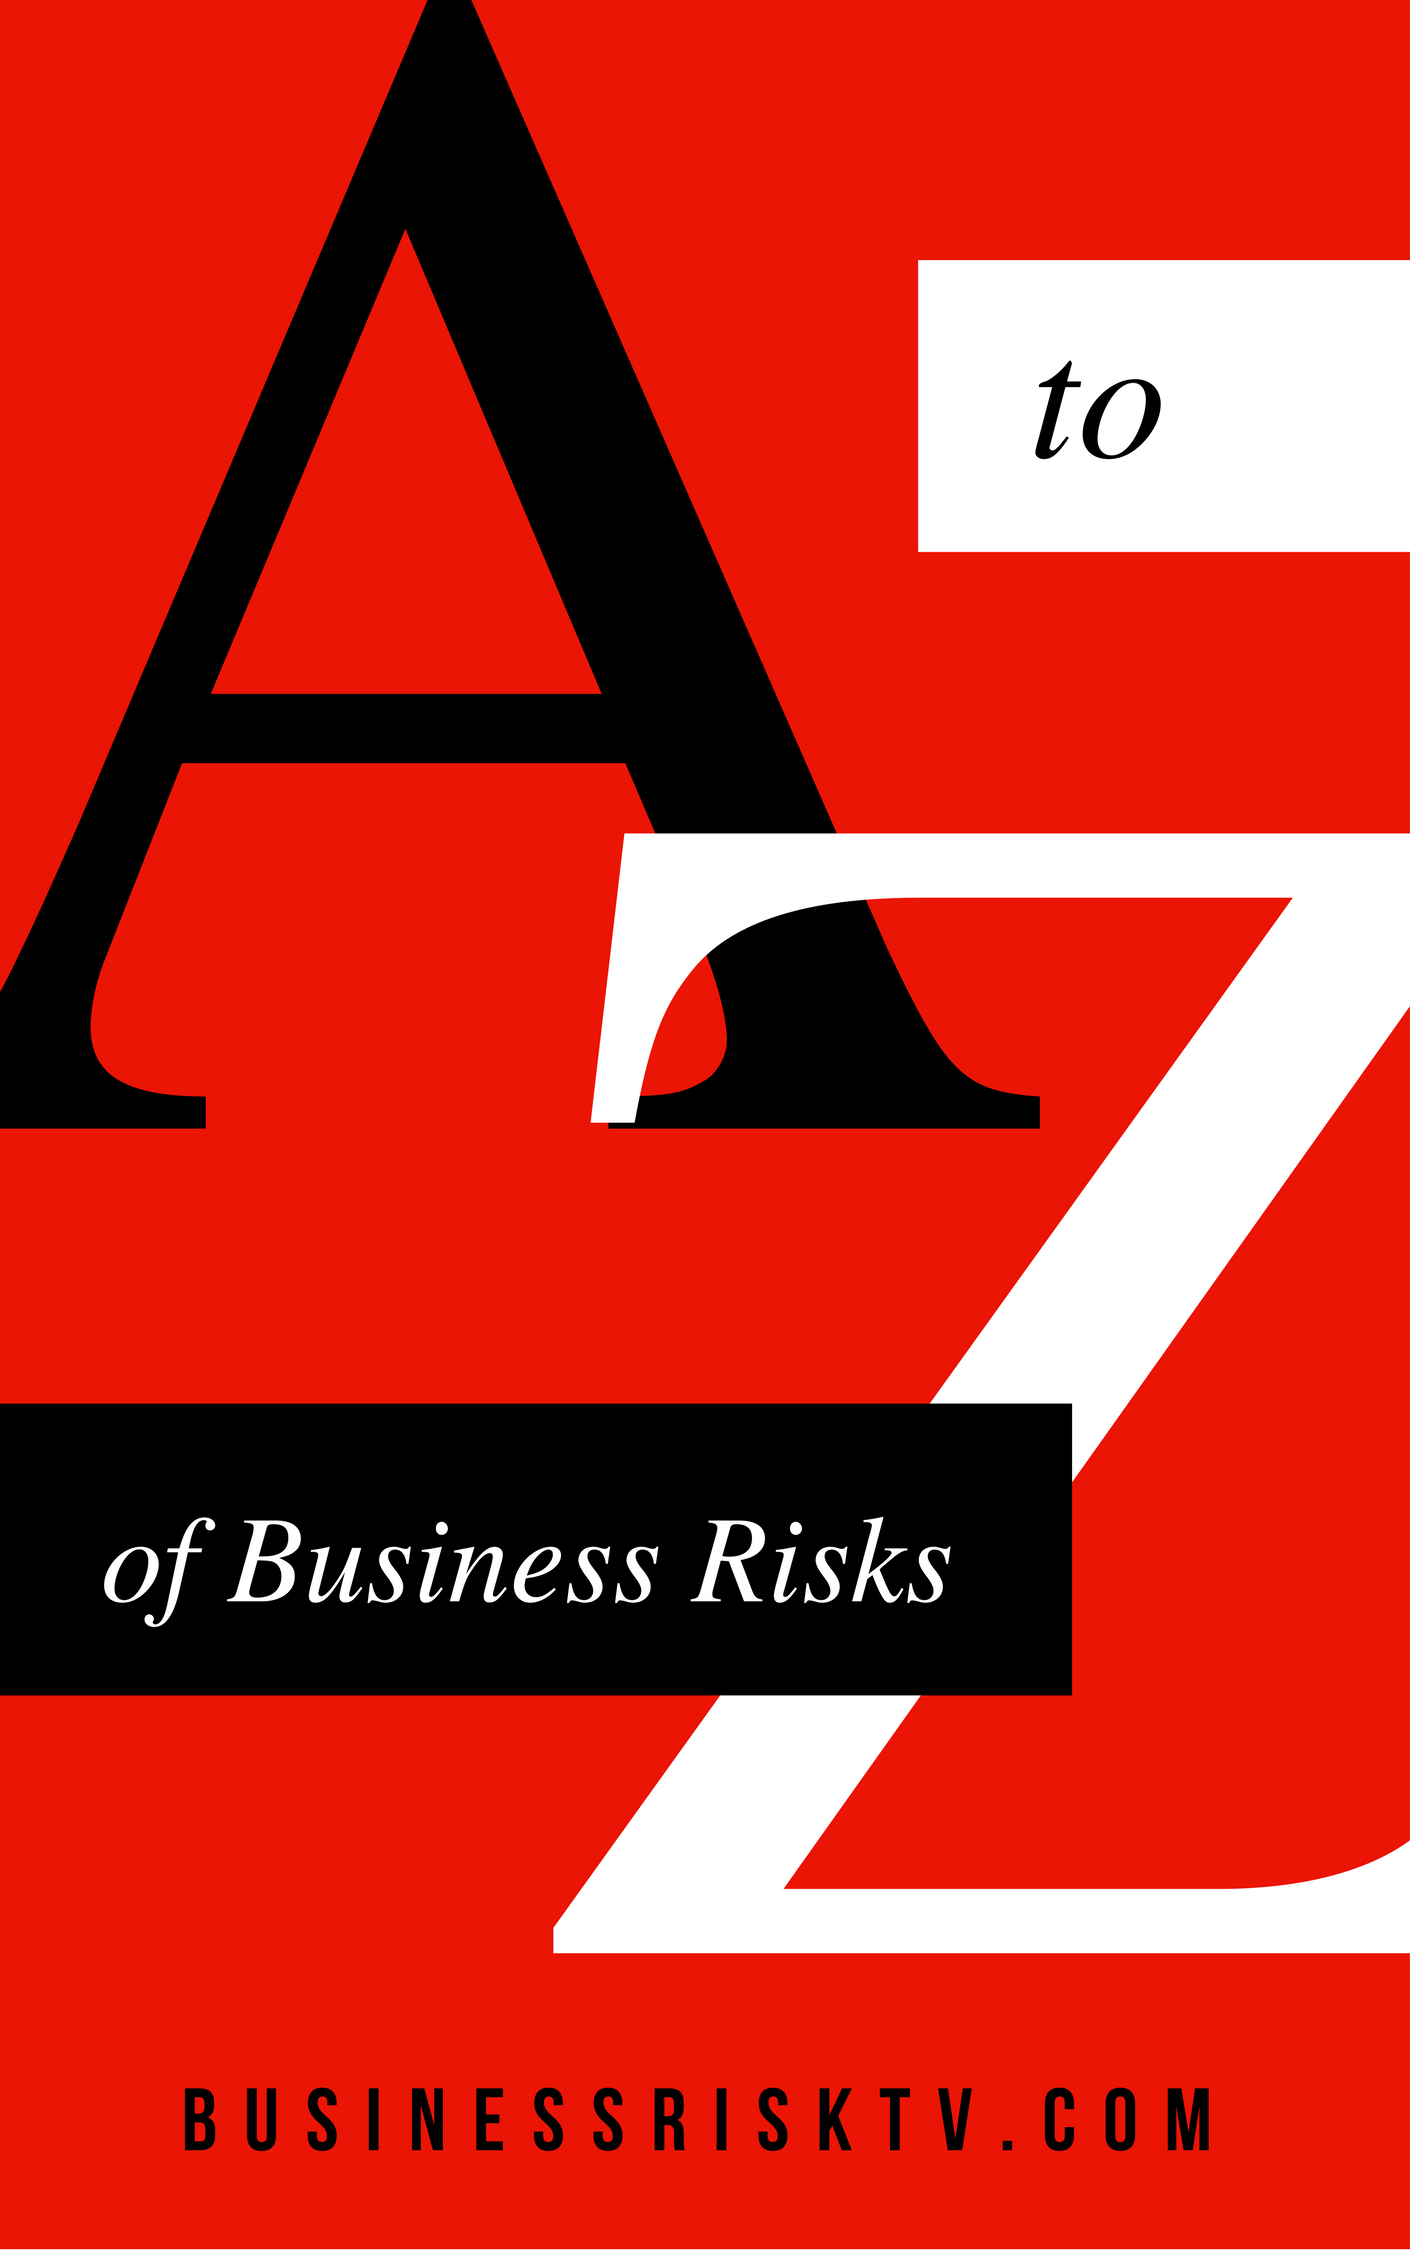 A to Z Business Risk Management